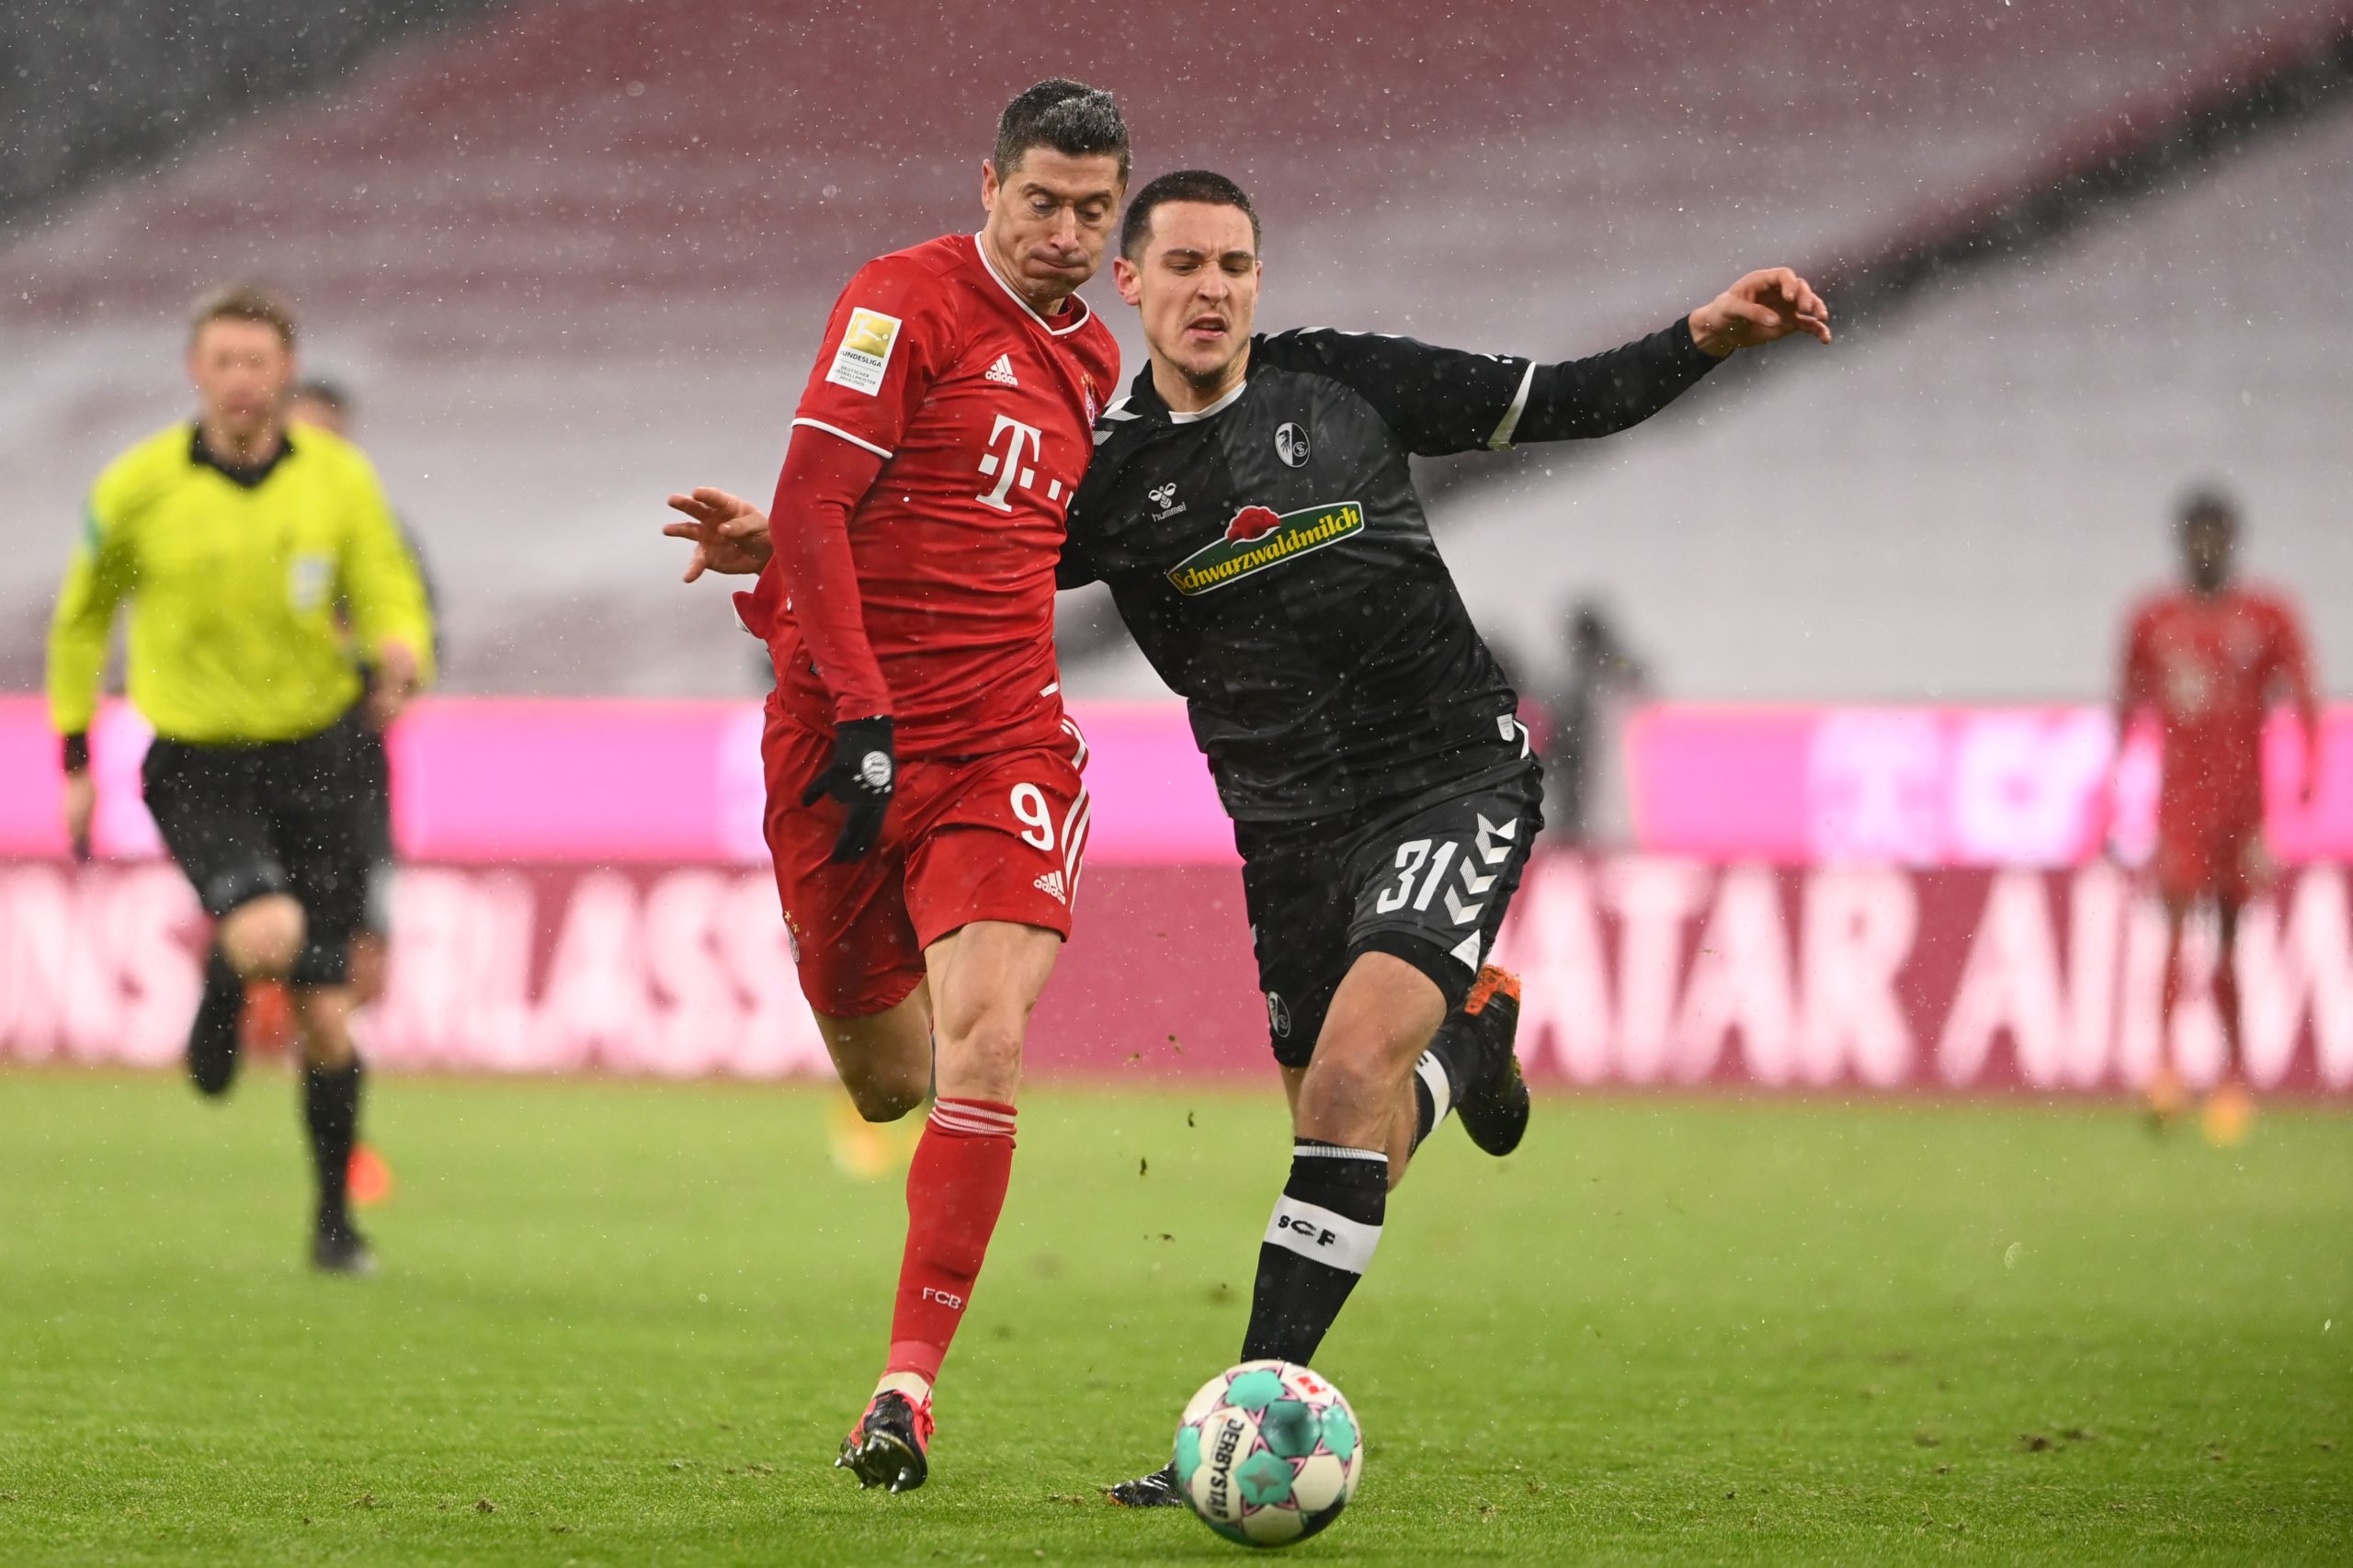 Manchester City to rival Chelsea for Lewandowski who is seen in the picture